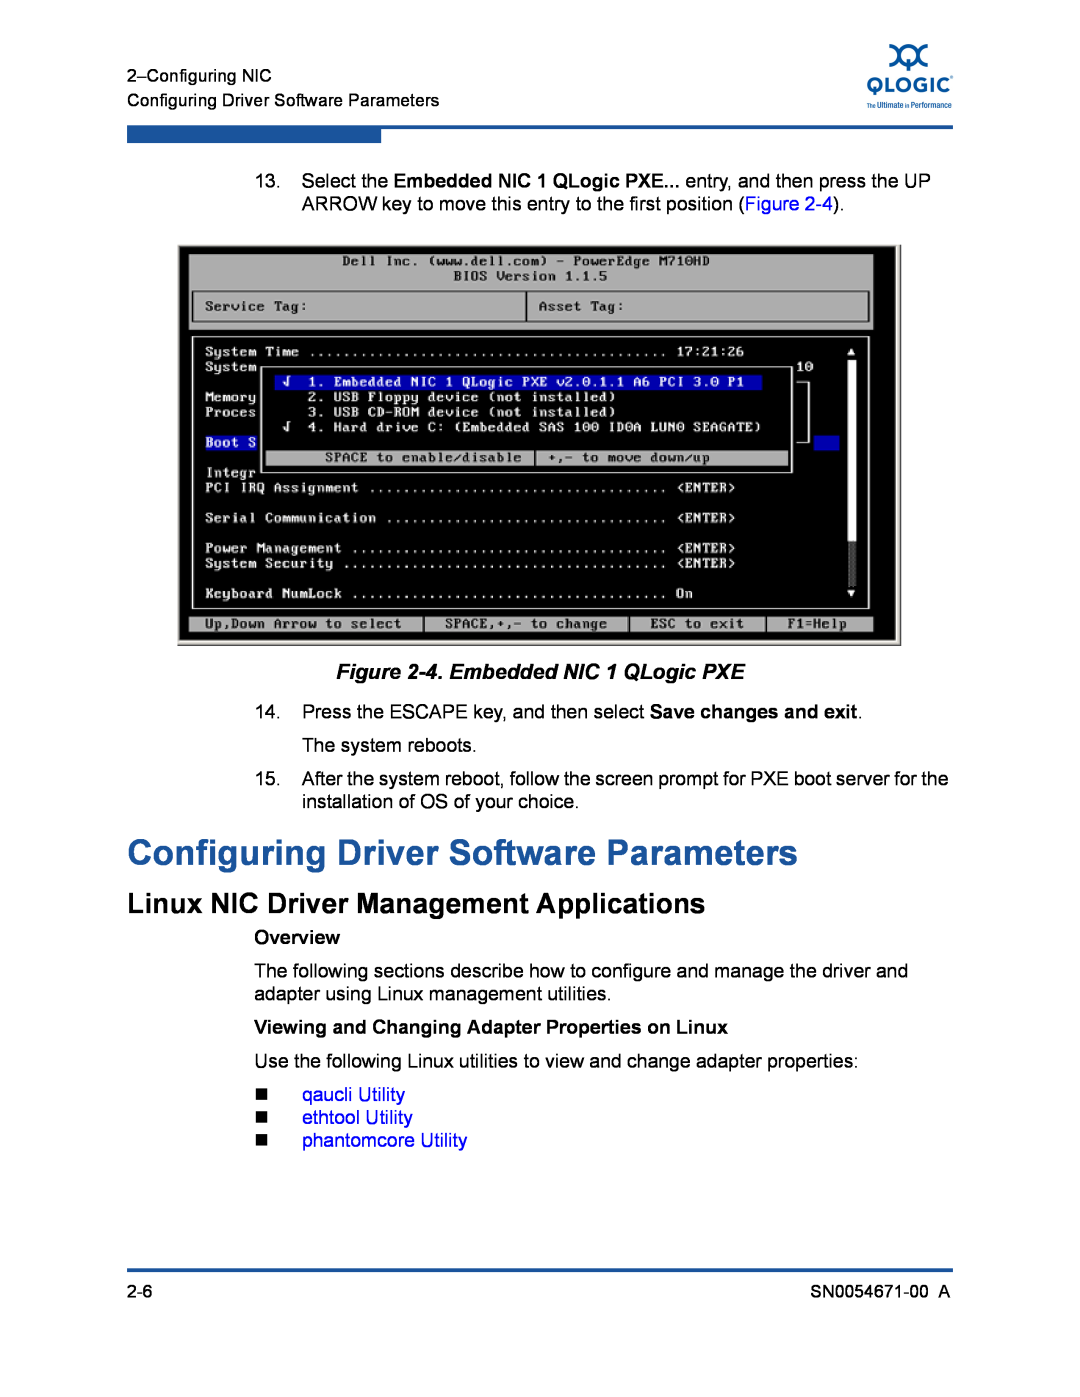 Q-Logic 8200, 3200 manual Configuring Driver Software Parameters, Linux NIC Driver Management Applications, Overview 